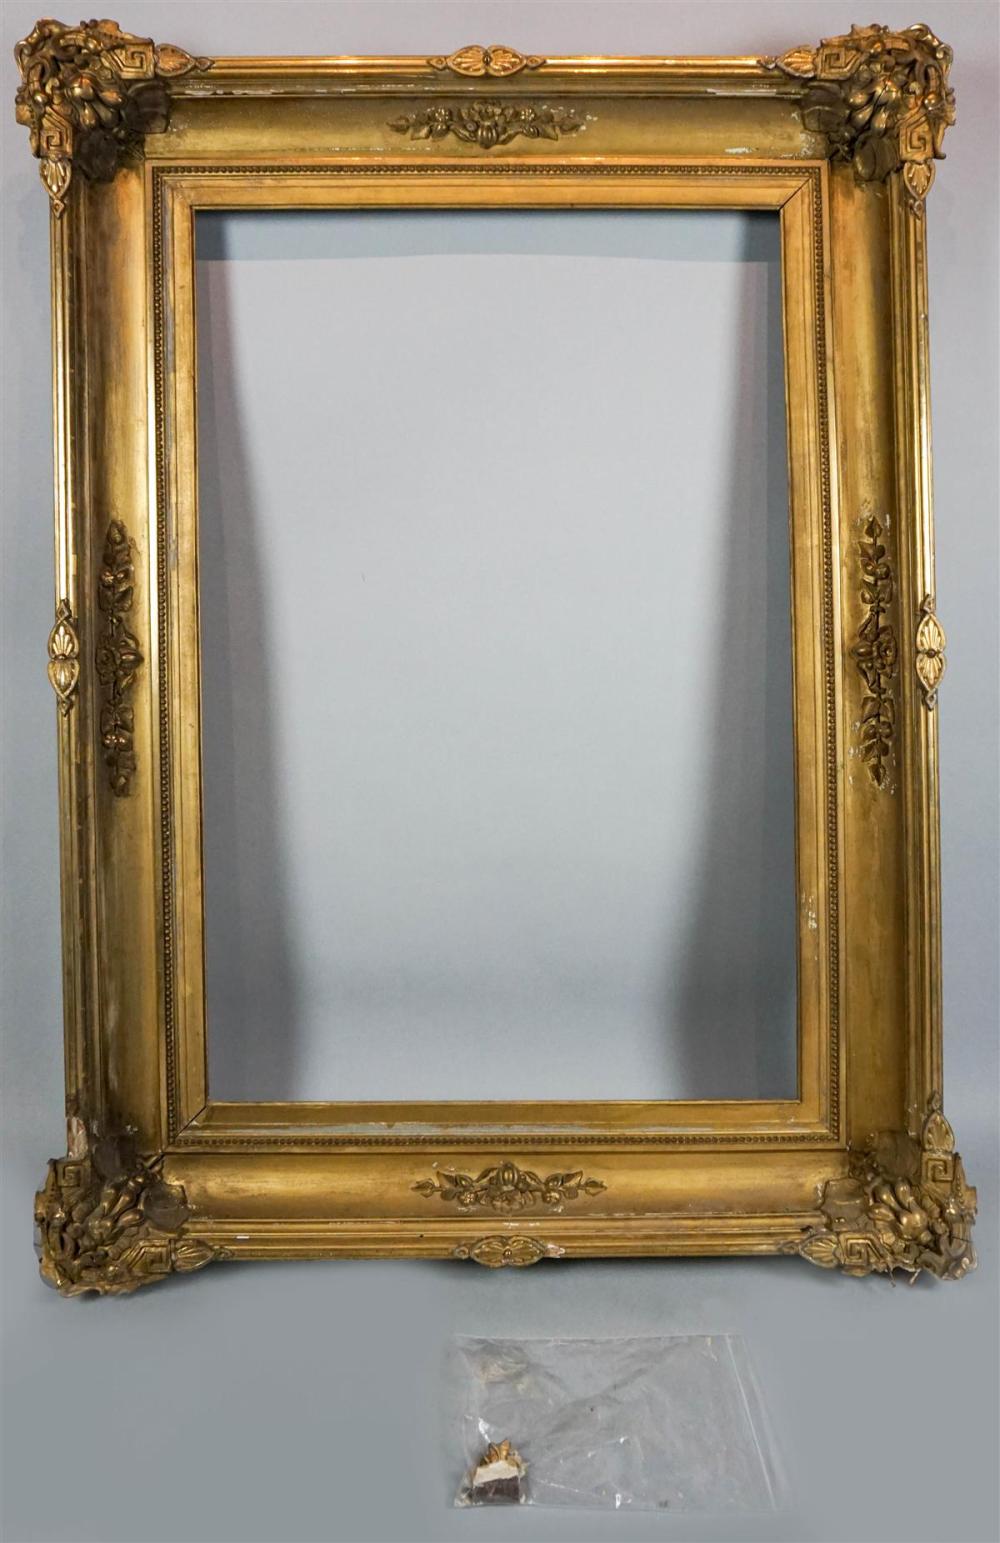 LOUIS XV STYLE GILTWOOD FRAME WITH 339dc2